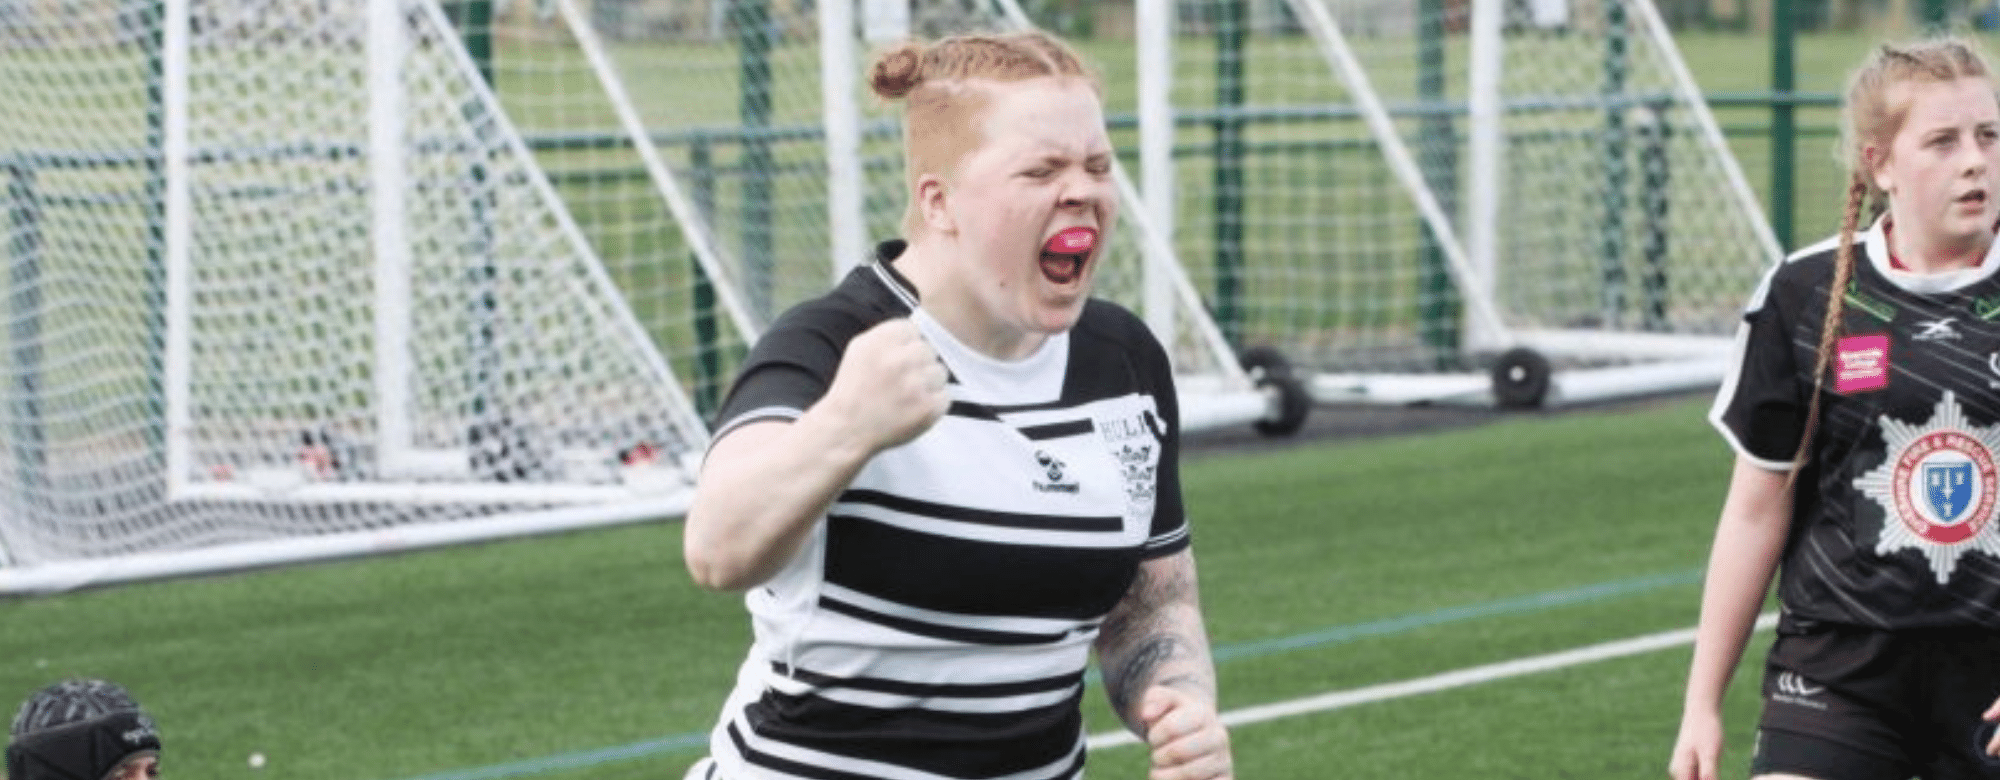 Hull FC Women’s Squad Open Day On December 12th